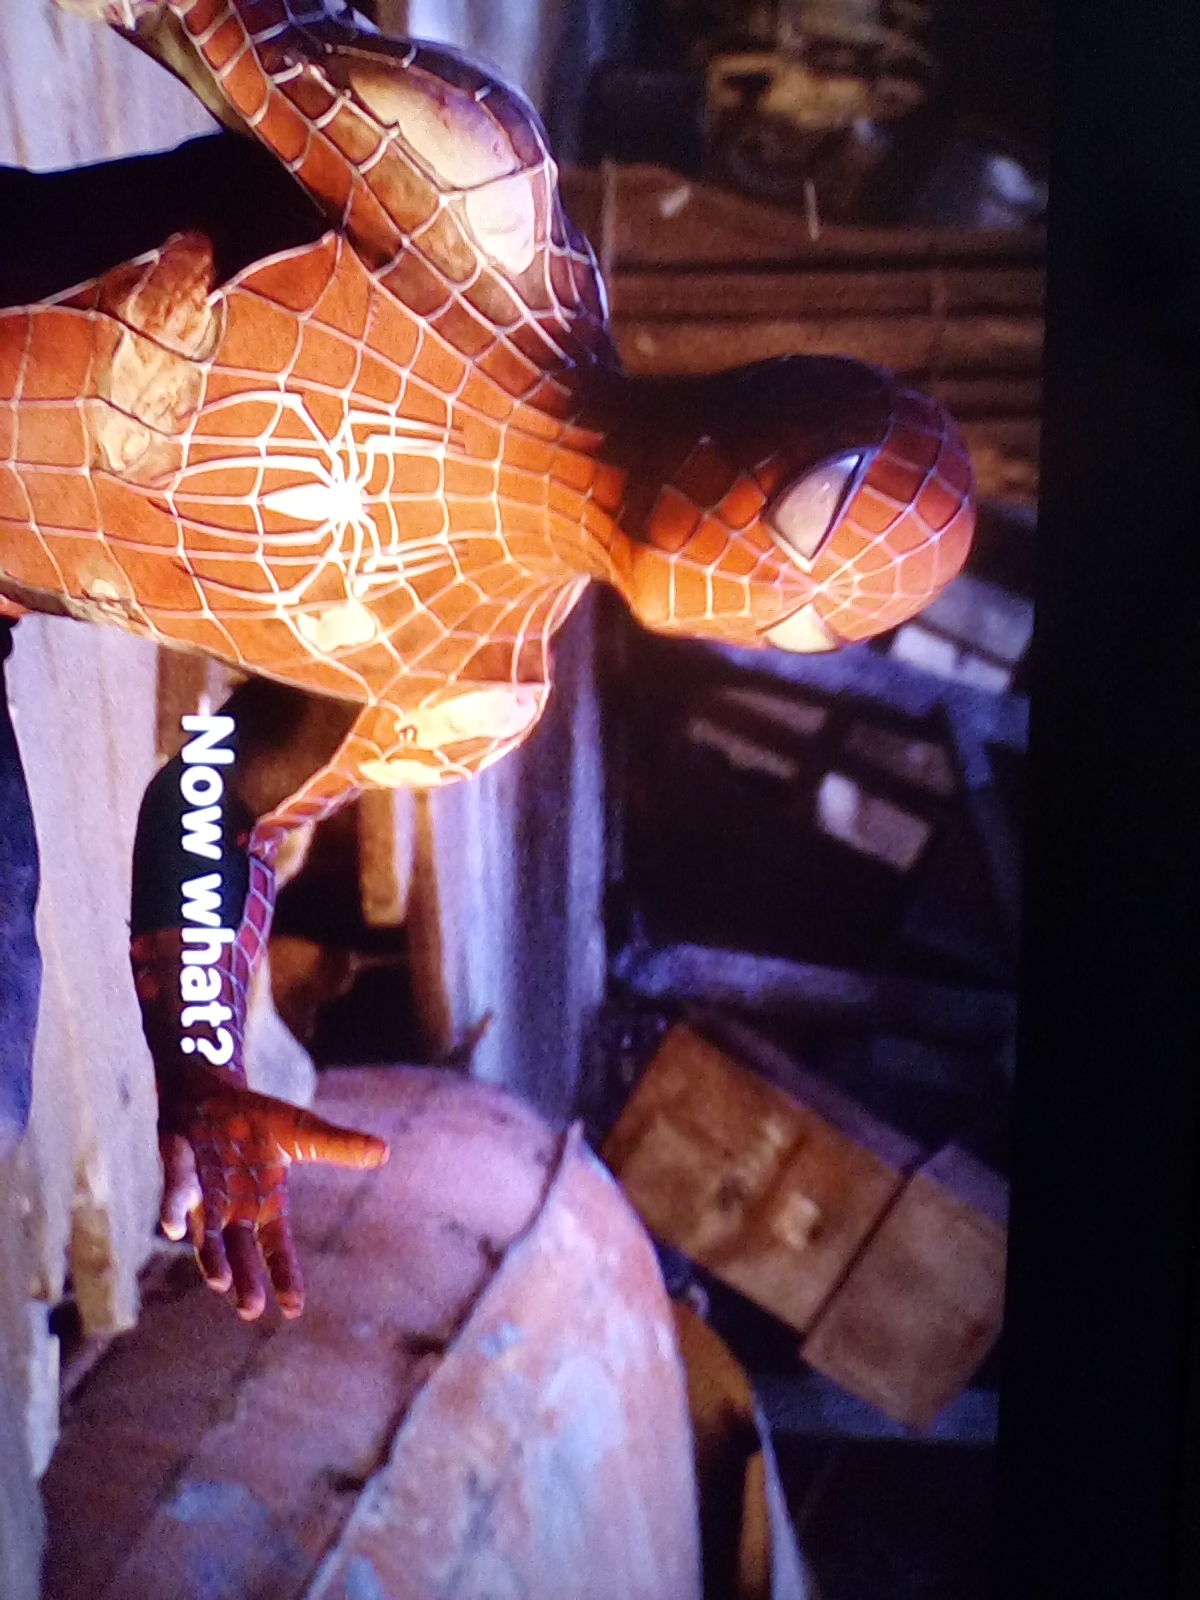 Spiderman now what Blank Meme Template